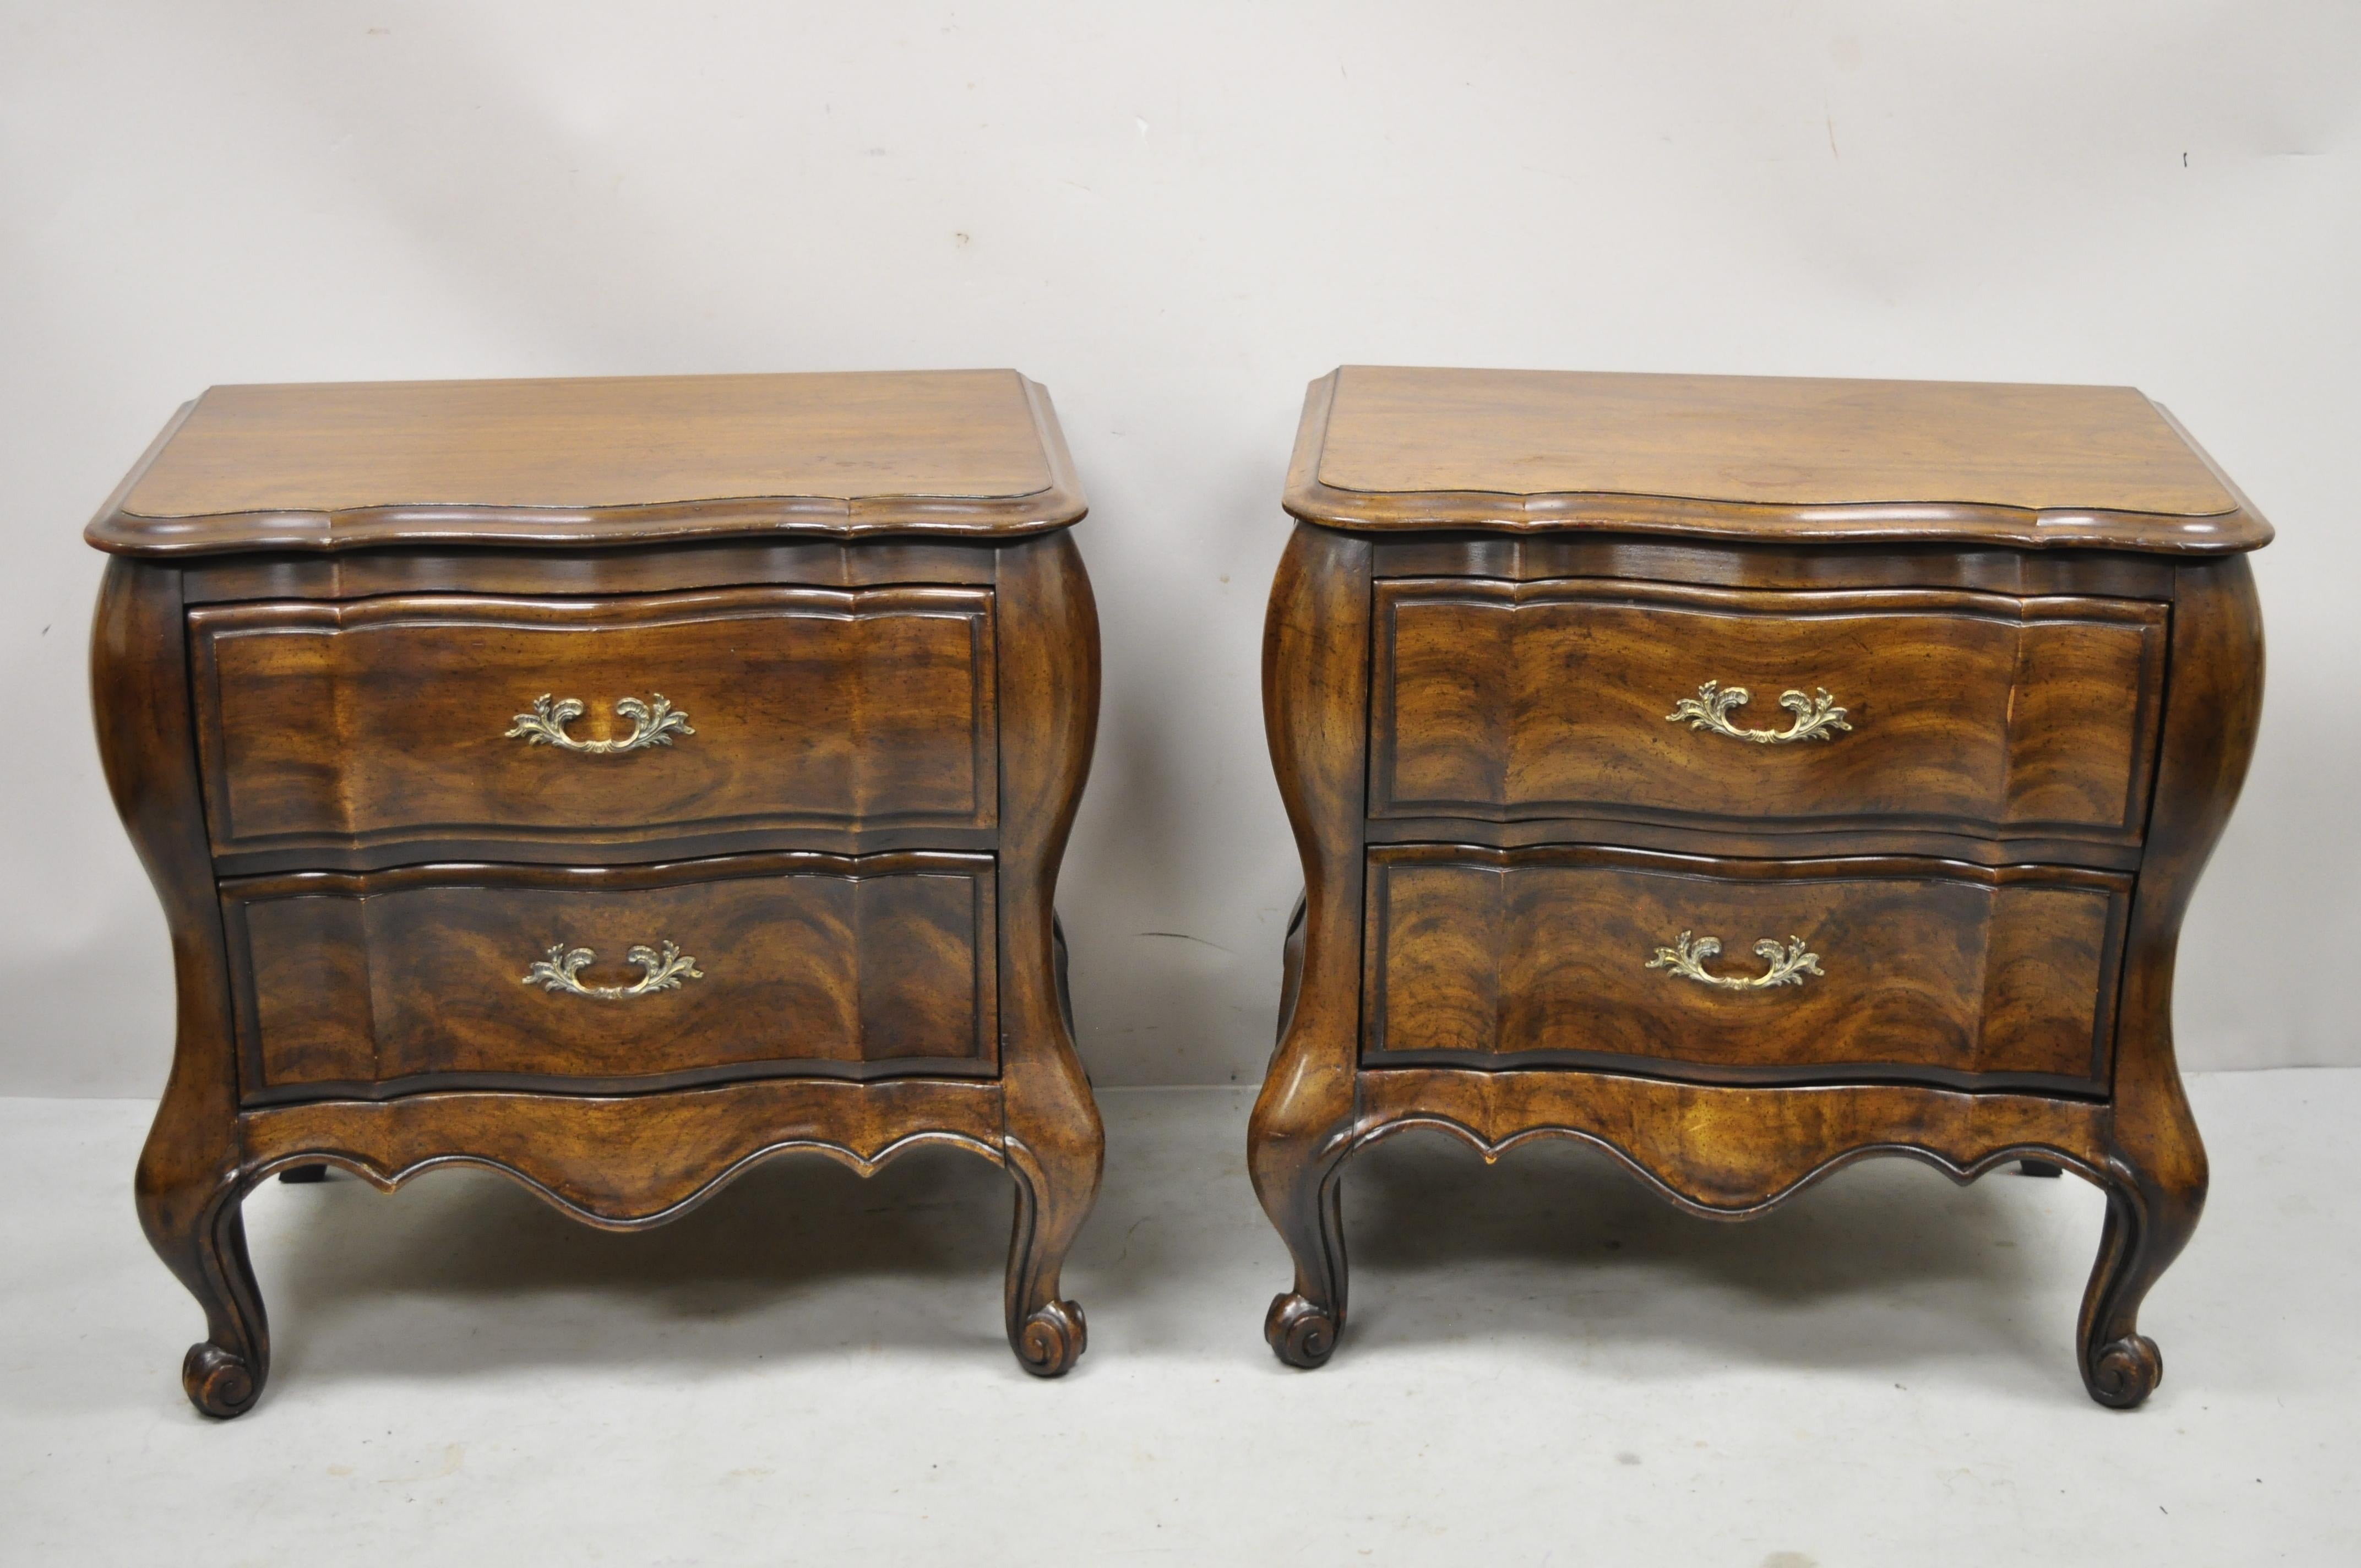 Vintage French provincial cherry wood bombe form nightstands by White Furniture - a Pair. Item features shapely bombe form, solid wood construction, beautiful wood grain, distressed finish, original stamp, 2 dovetailed drawers, cabriole legs, solid